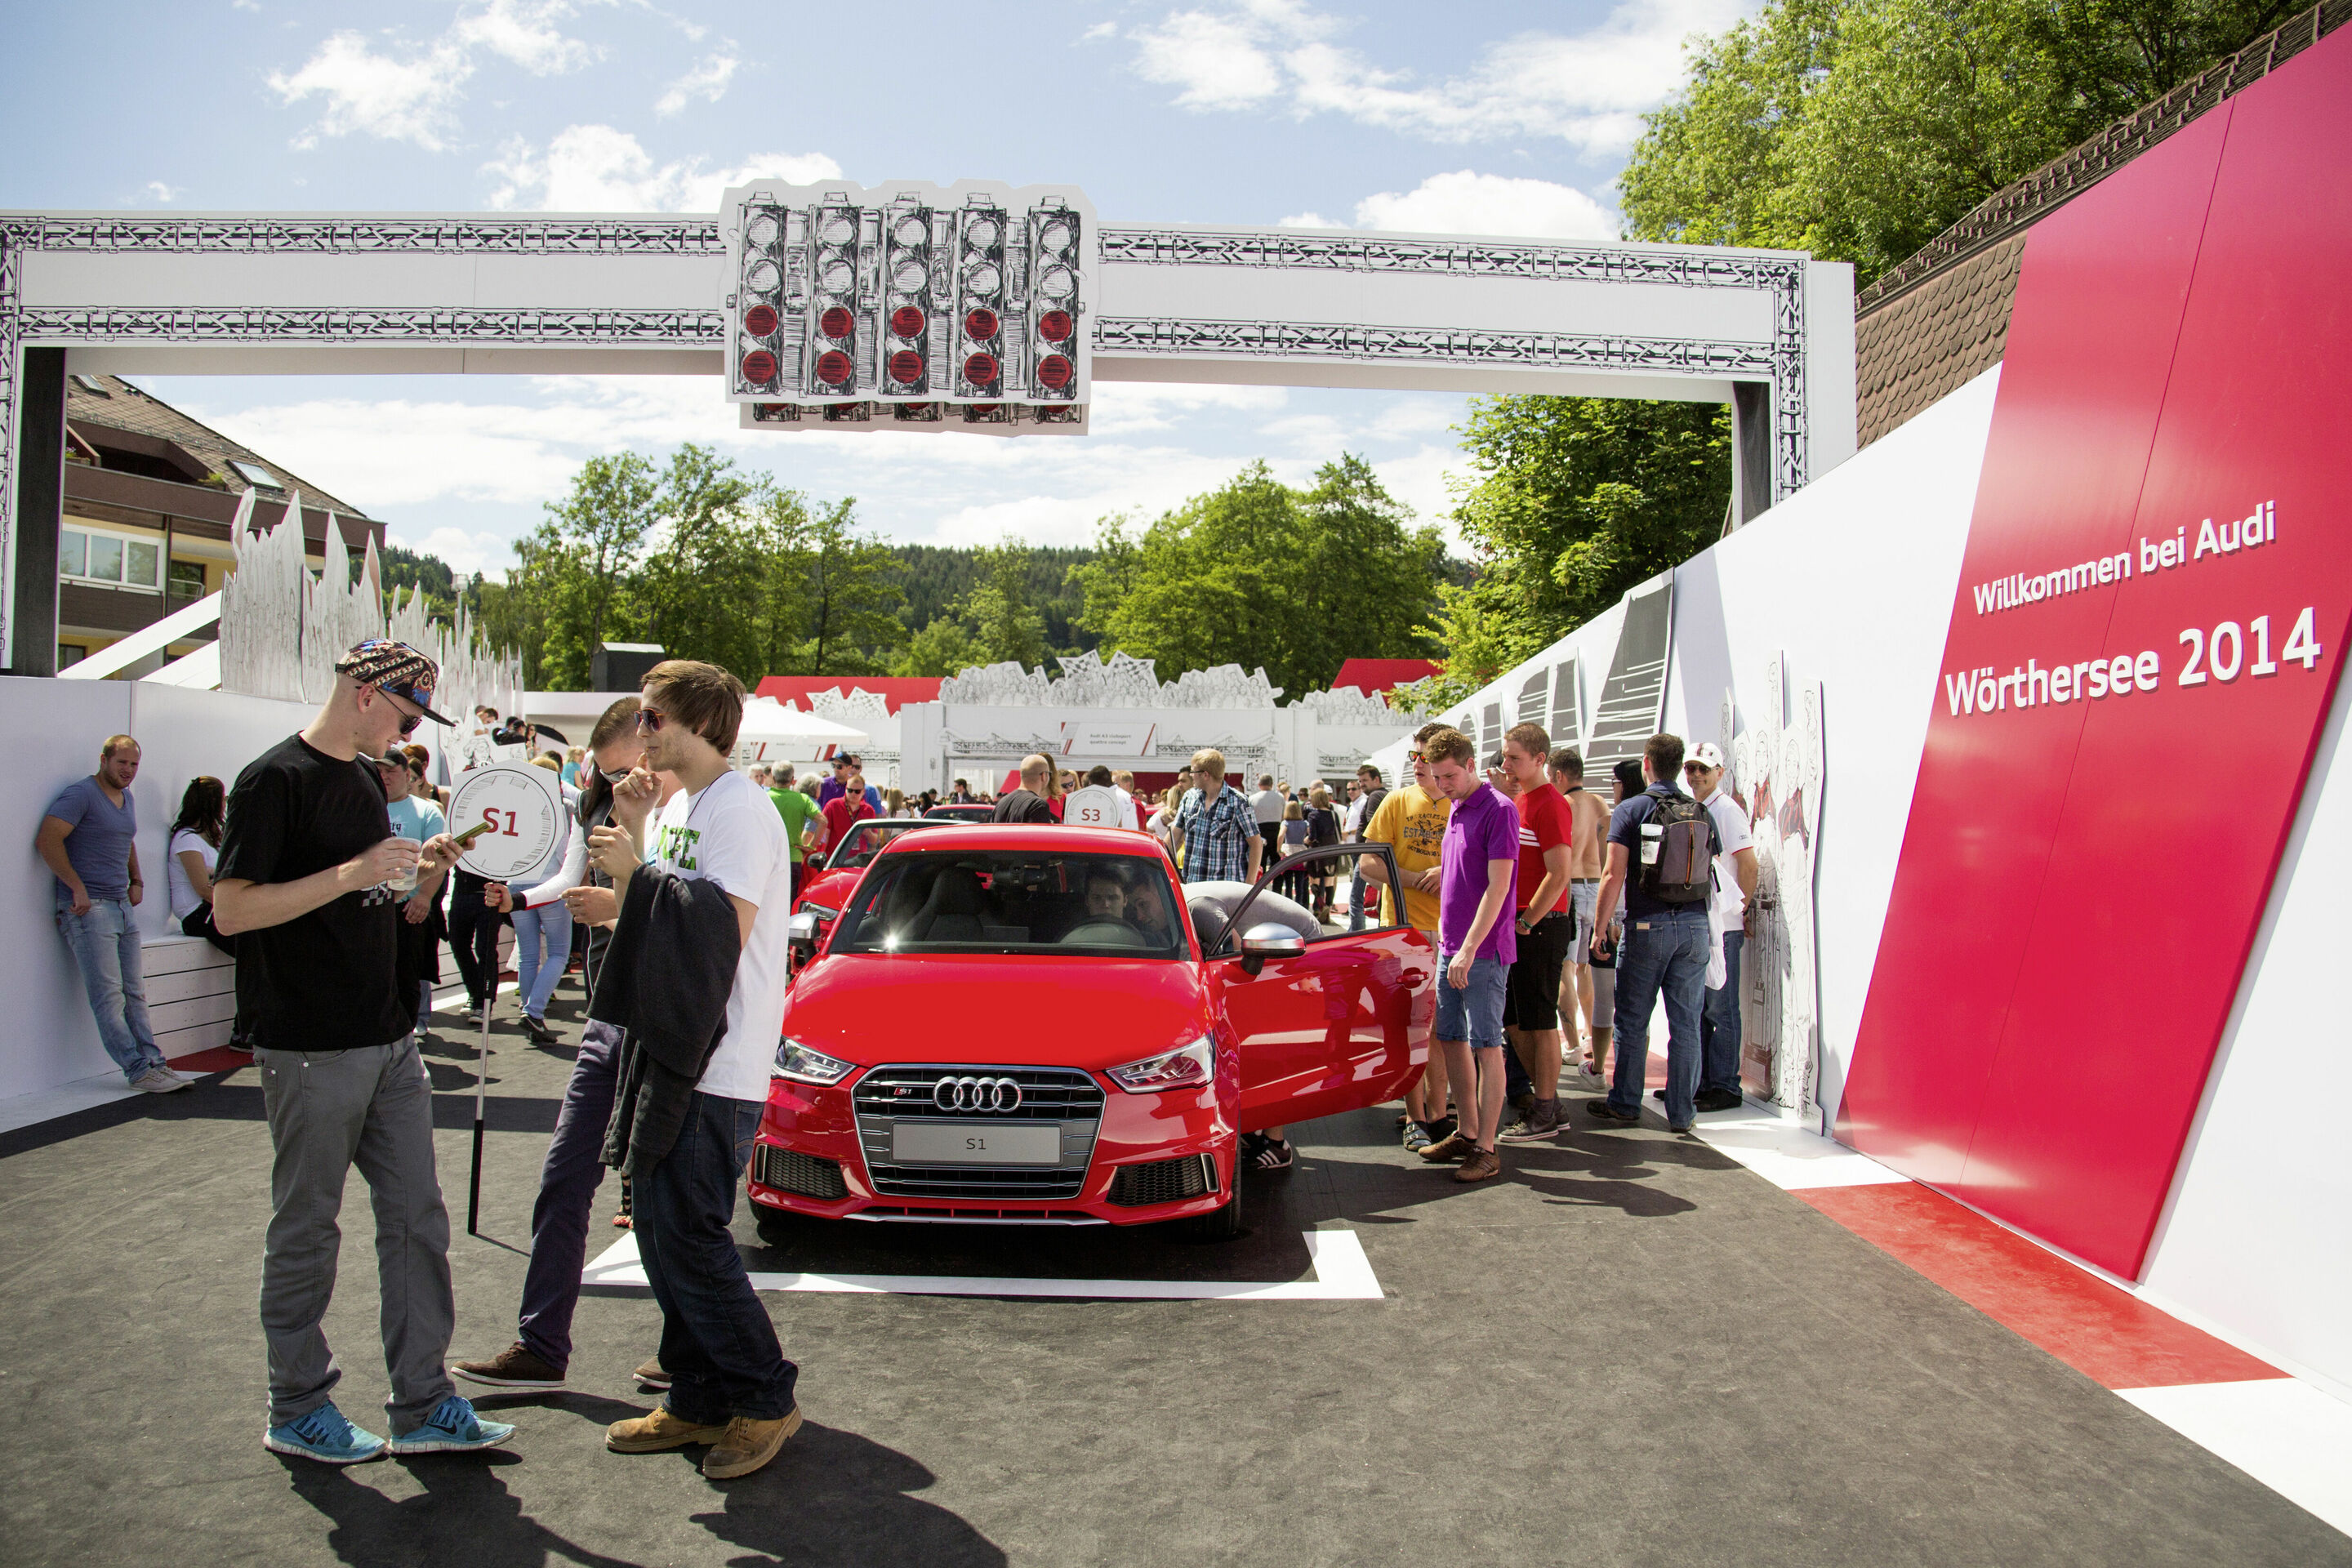 Audi at the 2014 Wörthersee